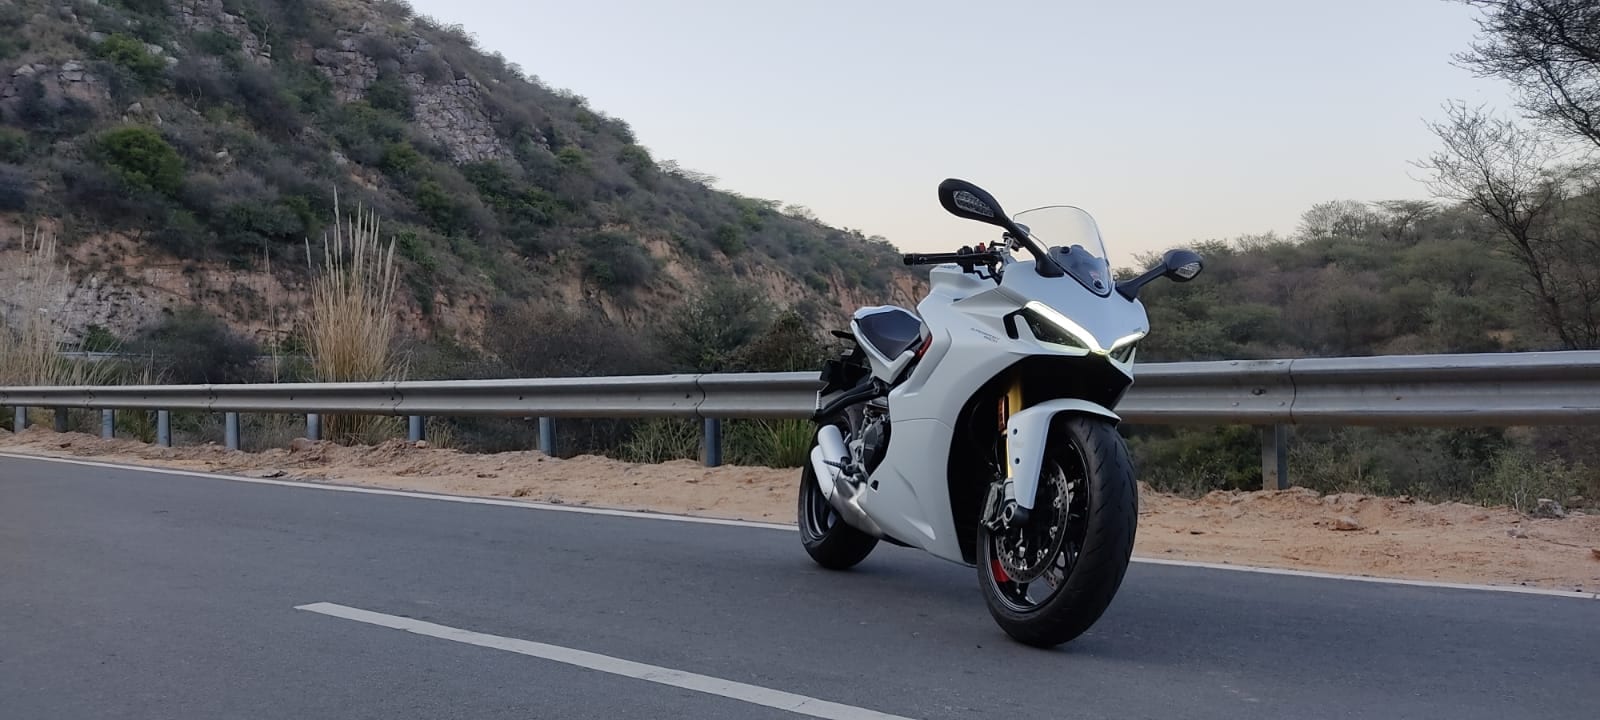 2021 Ducati 950 SuperSport First Look Preview | Motorcyclist